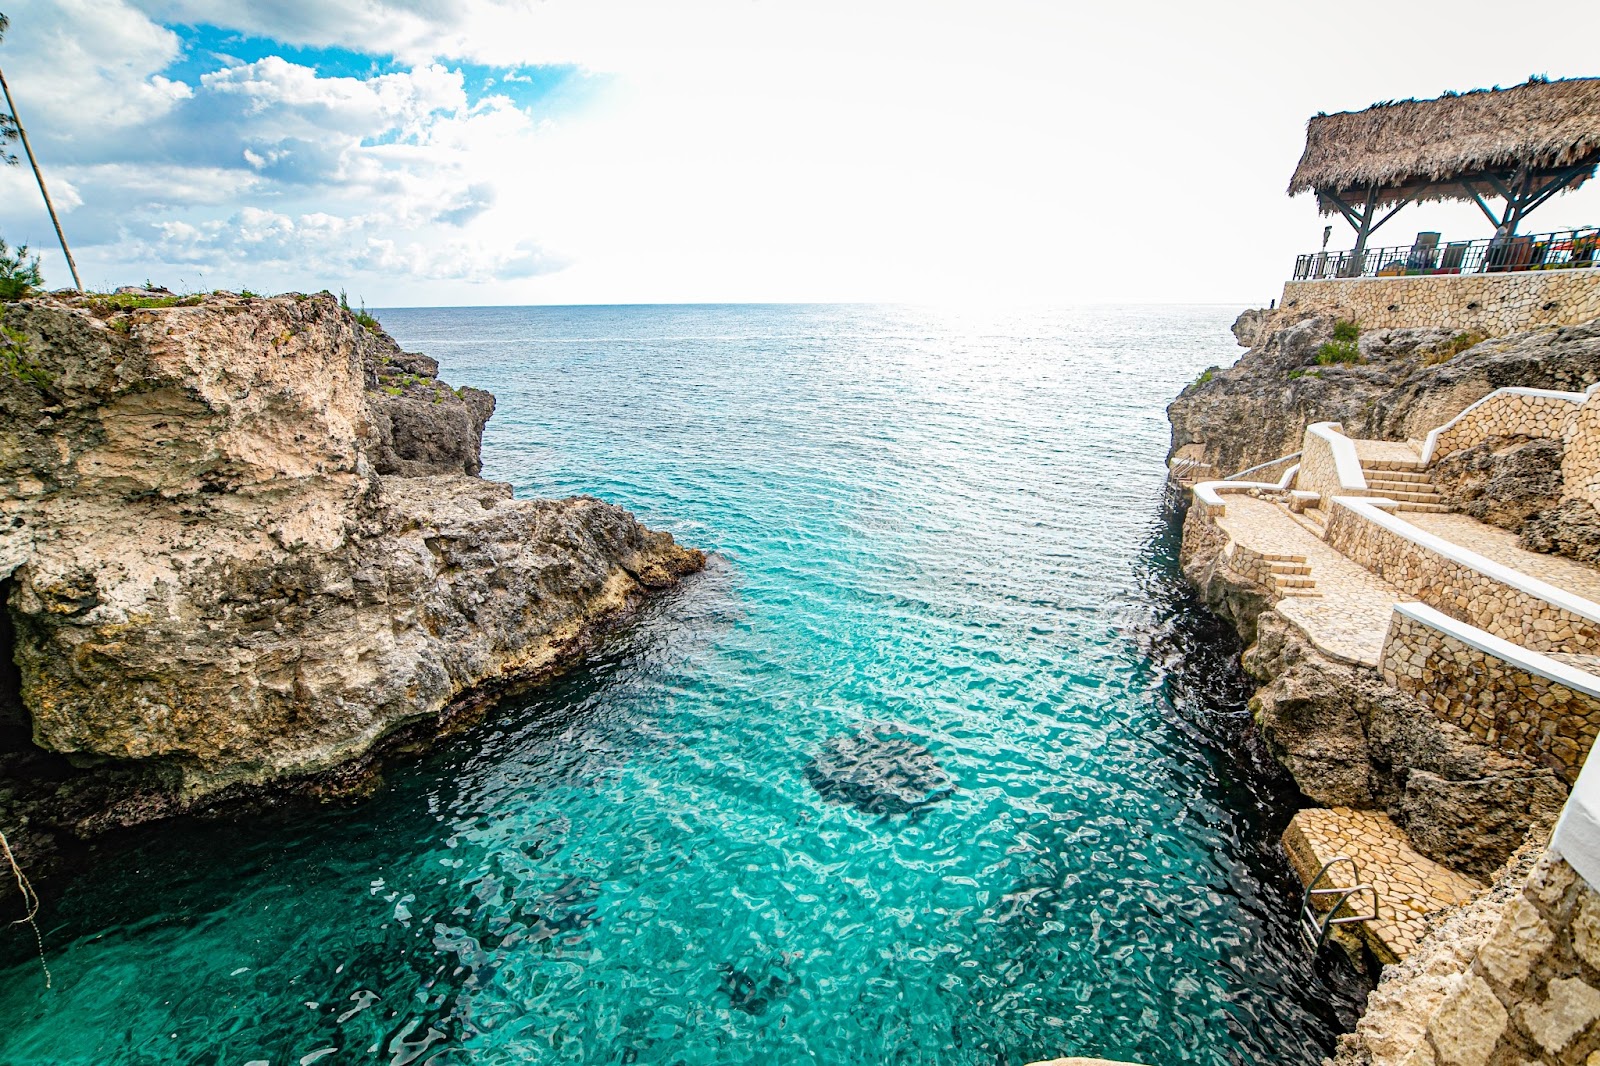 A captivating image from the top of 35-foot cliffs at Rick's Café in Negril, Jamaica. Experience delicious food and cliff jumping with a stunning view.